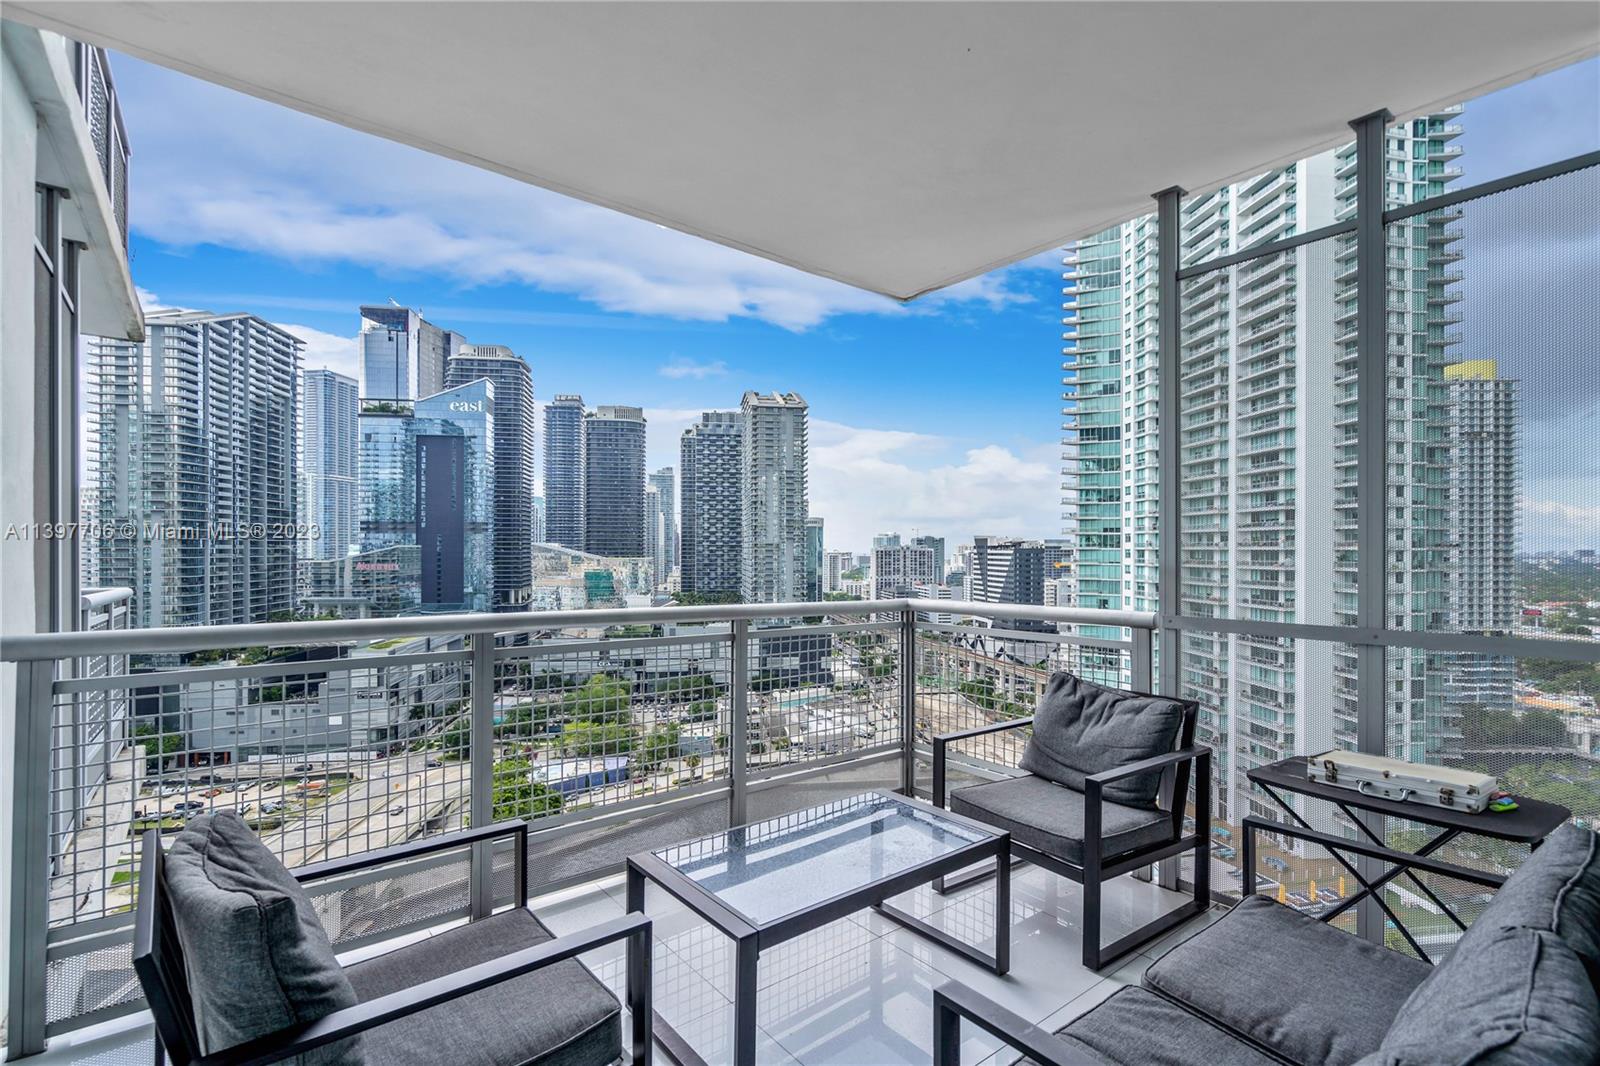 *SUBLEASE FRIENDLY - ASK LISTING AGENT FOR DETAILS* UNIT IS RENTED FULLY FURNISHED MAKING IT PERFECT FOR ANYONE LOOKING TO MOVE IN WITH JUST THEIR SUITCASE. ENJOY TOP OF THE LINE AMENITIES AND VIEWS FROM YOUR BALCONY. LANDLORD IS OPEN AND PET FRIENDLY MAKING IT AN EASY PROCESS FOR THE TENANT TO MOVE IN.